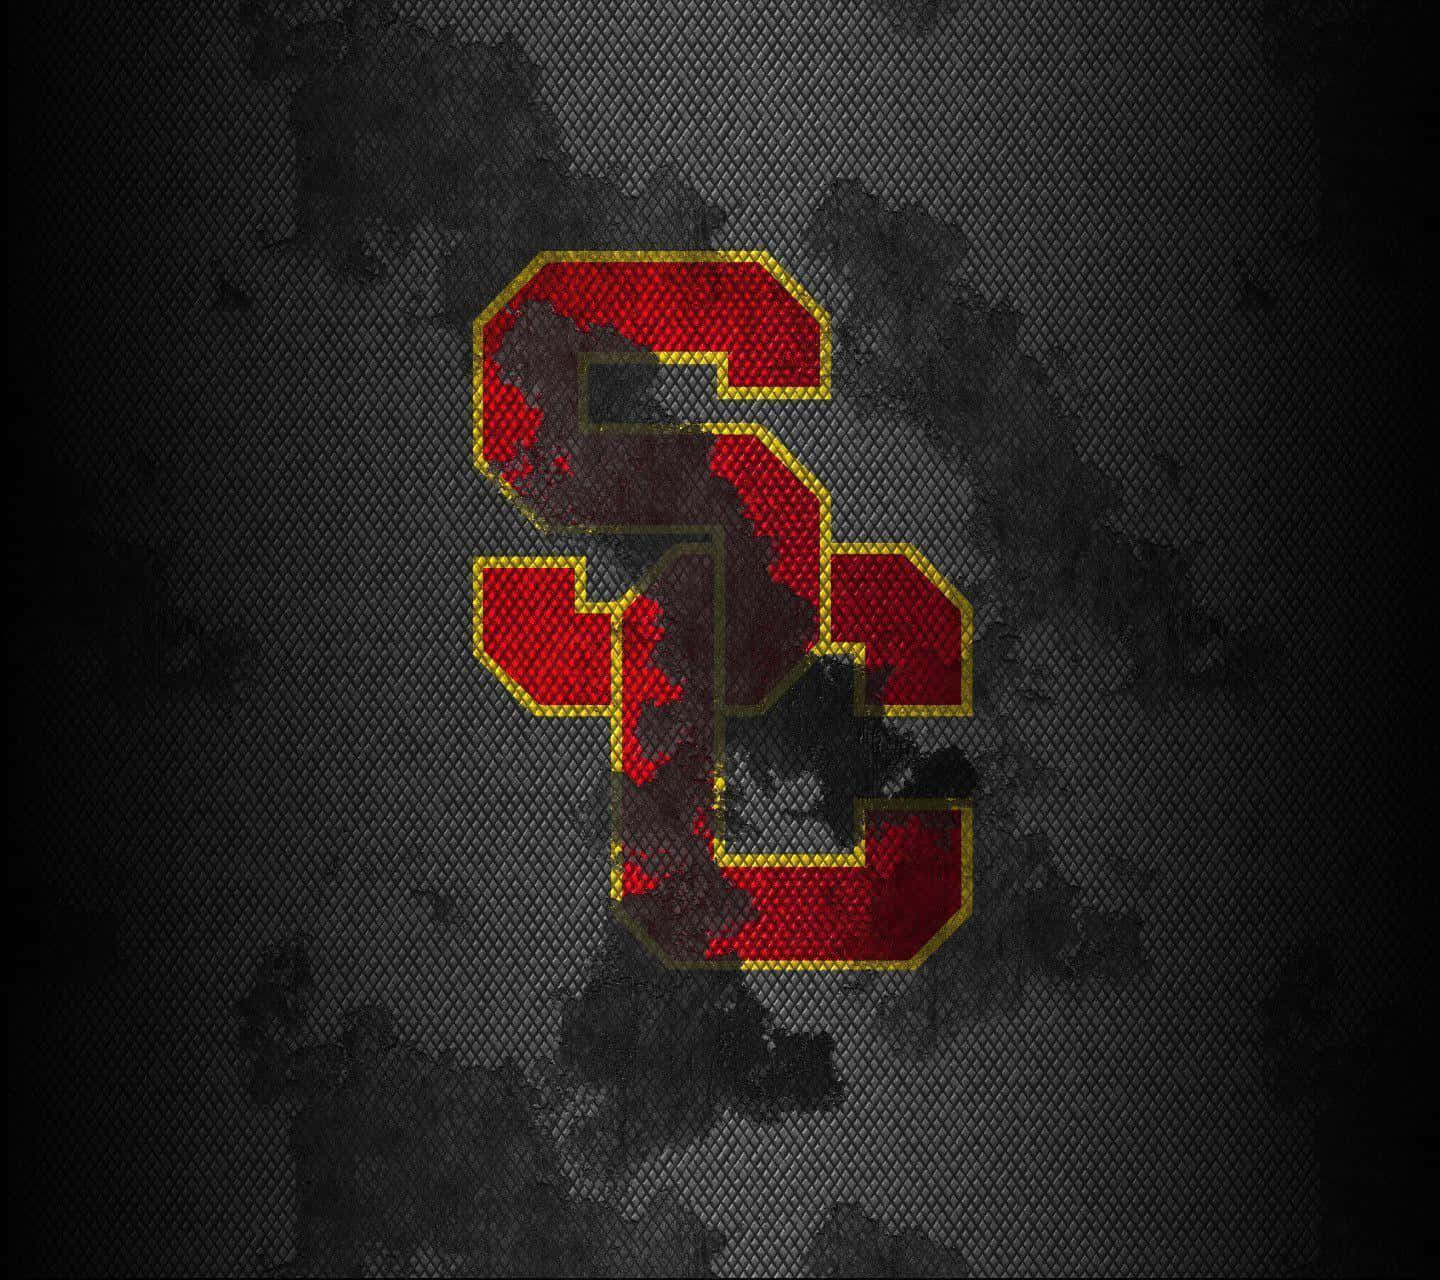 Usctrojans Excel On The Field